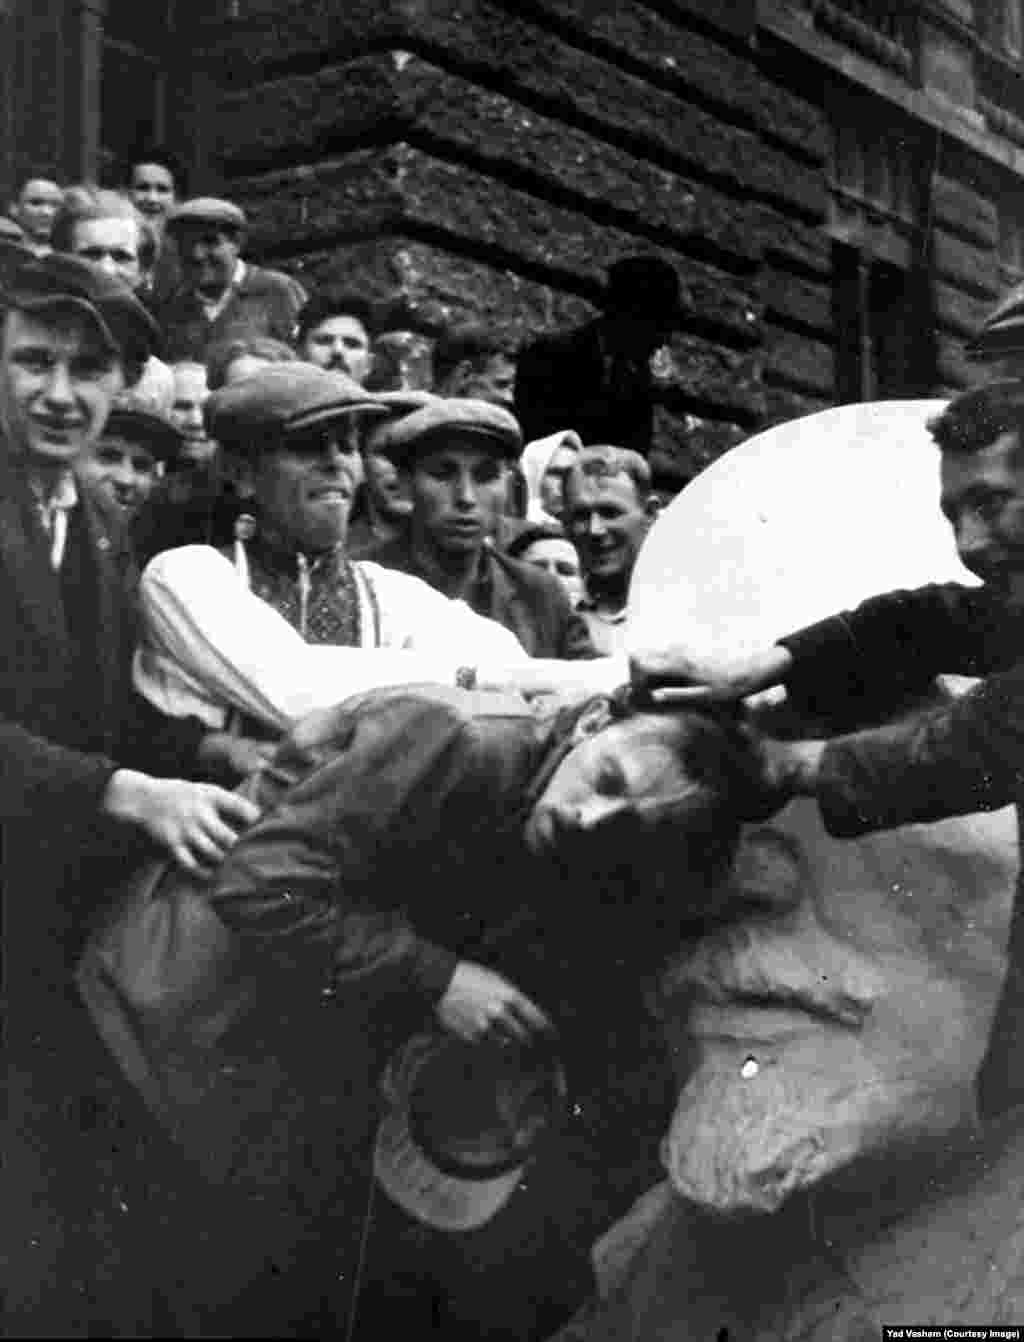 A Jewish man in western Ukraine being attacked by a mob next to a bust of Lenin. After occupying Nazi forces opened Soviet secret police prisons, atrocities carried out under Stalin were laid bare and exploited by Nazi propagandists, who fueled anti-Semitism by highlighting the Jewish backgrounds of some early Soviet leaders.